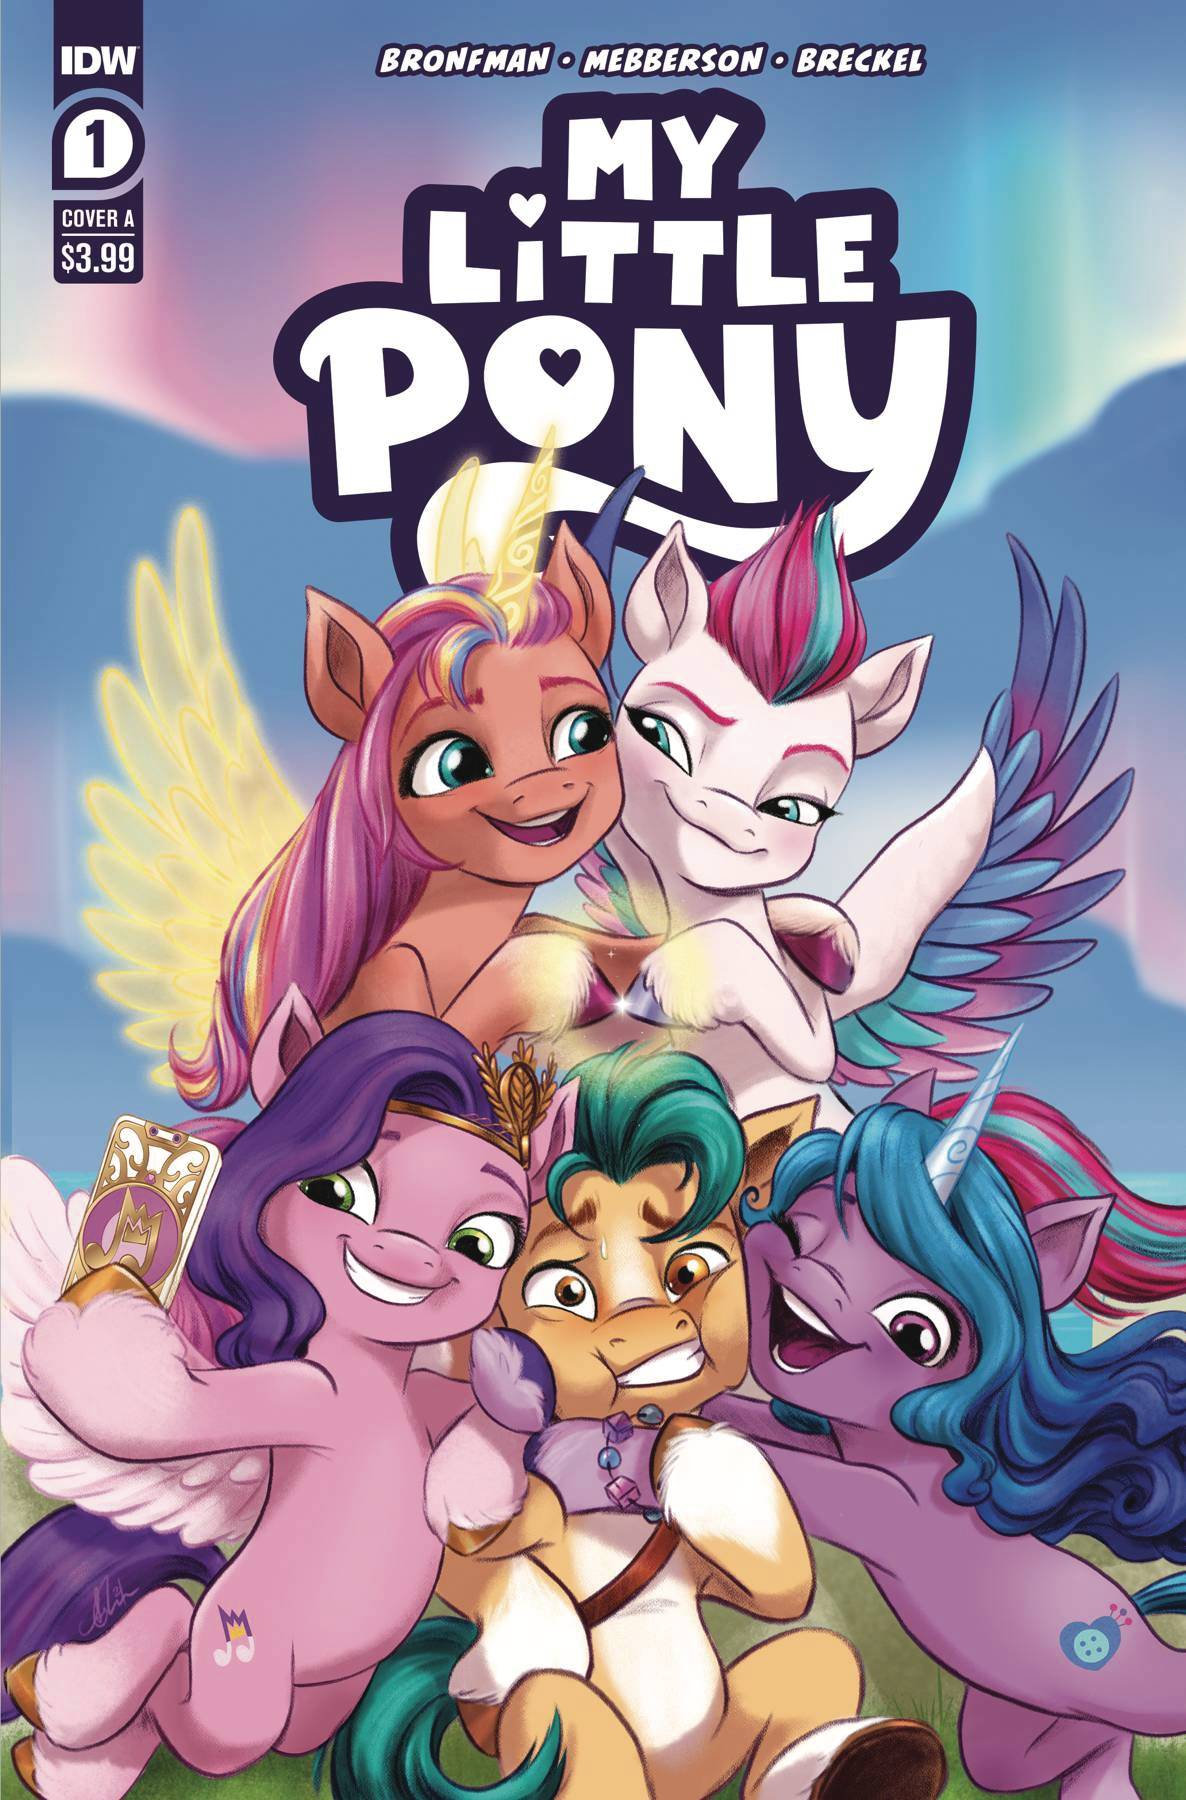 My Little Pony #2 Cover A